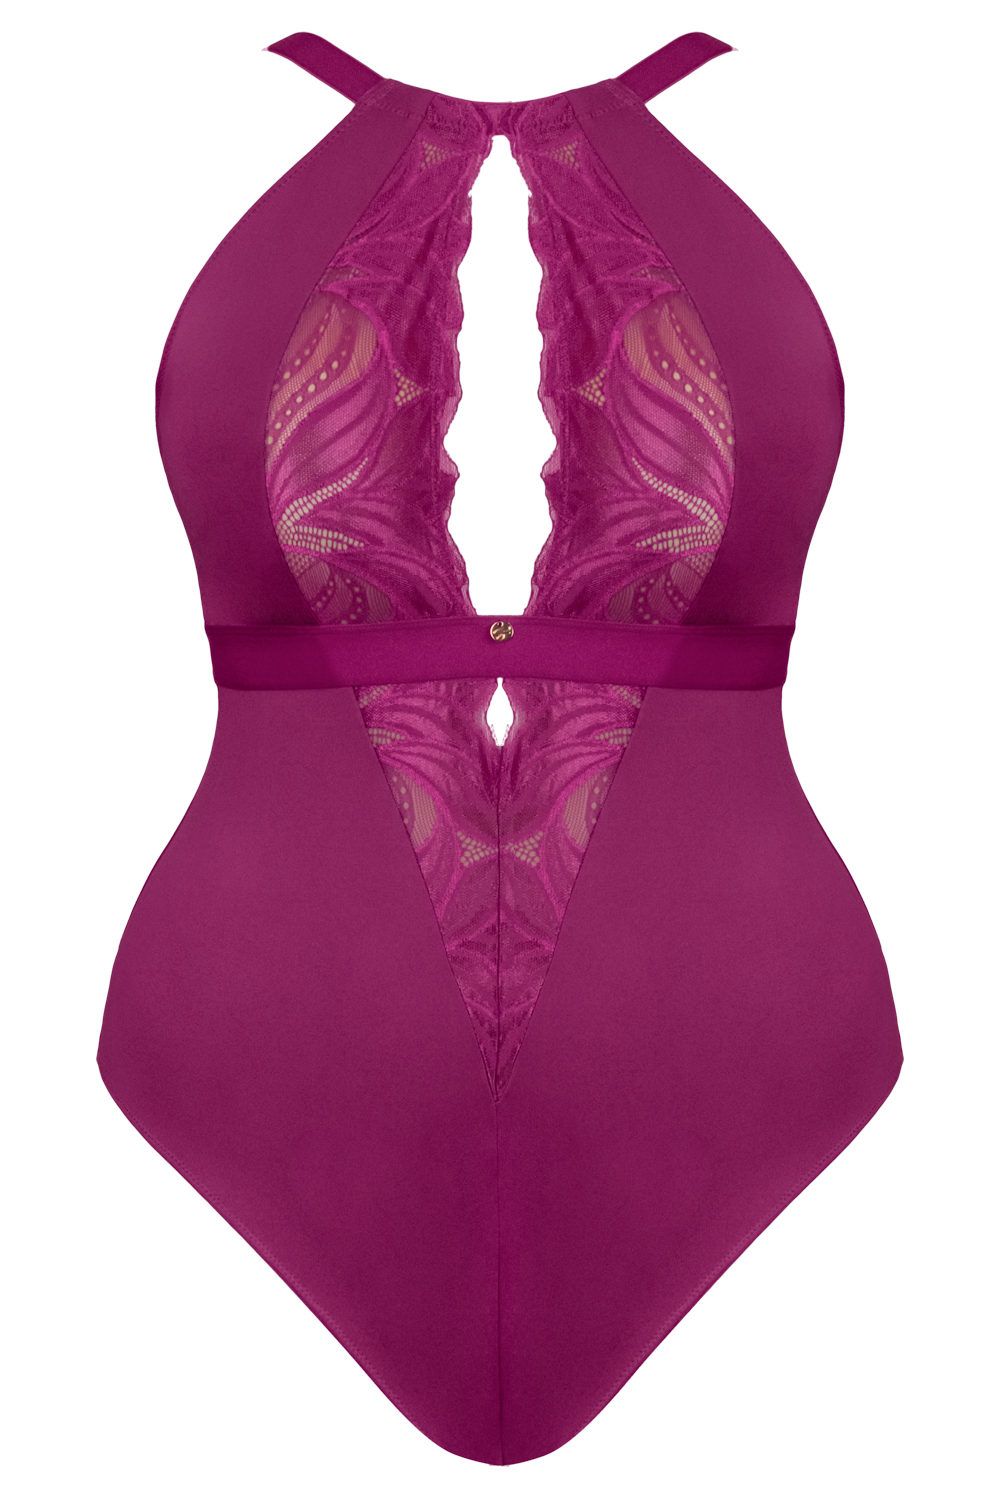 Curvy Kate Scantilly Indulgence Orchid Stretch Lace Bodysuit